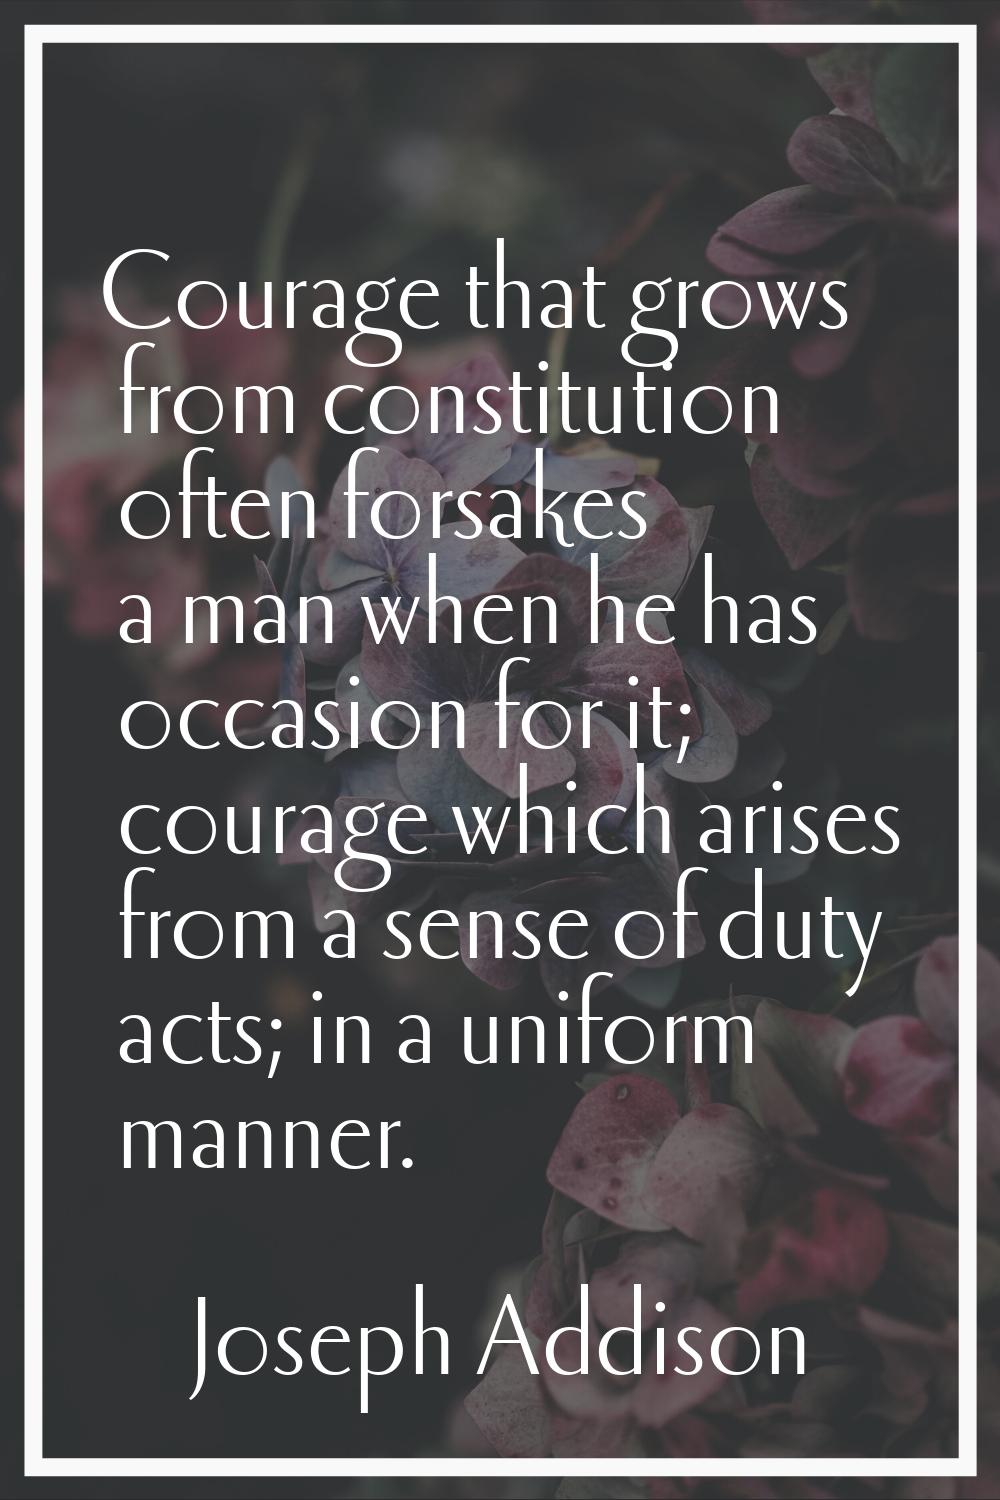 Courage that grows from constitution often forsakes a man when he has occasion for it; courage whic